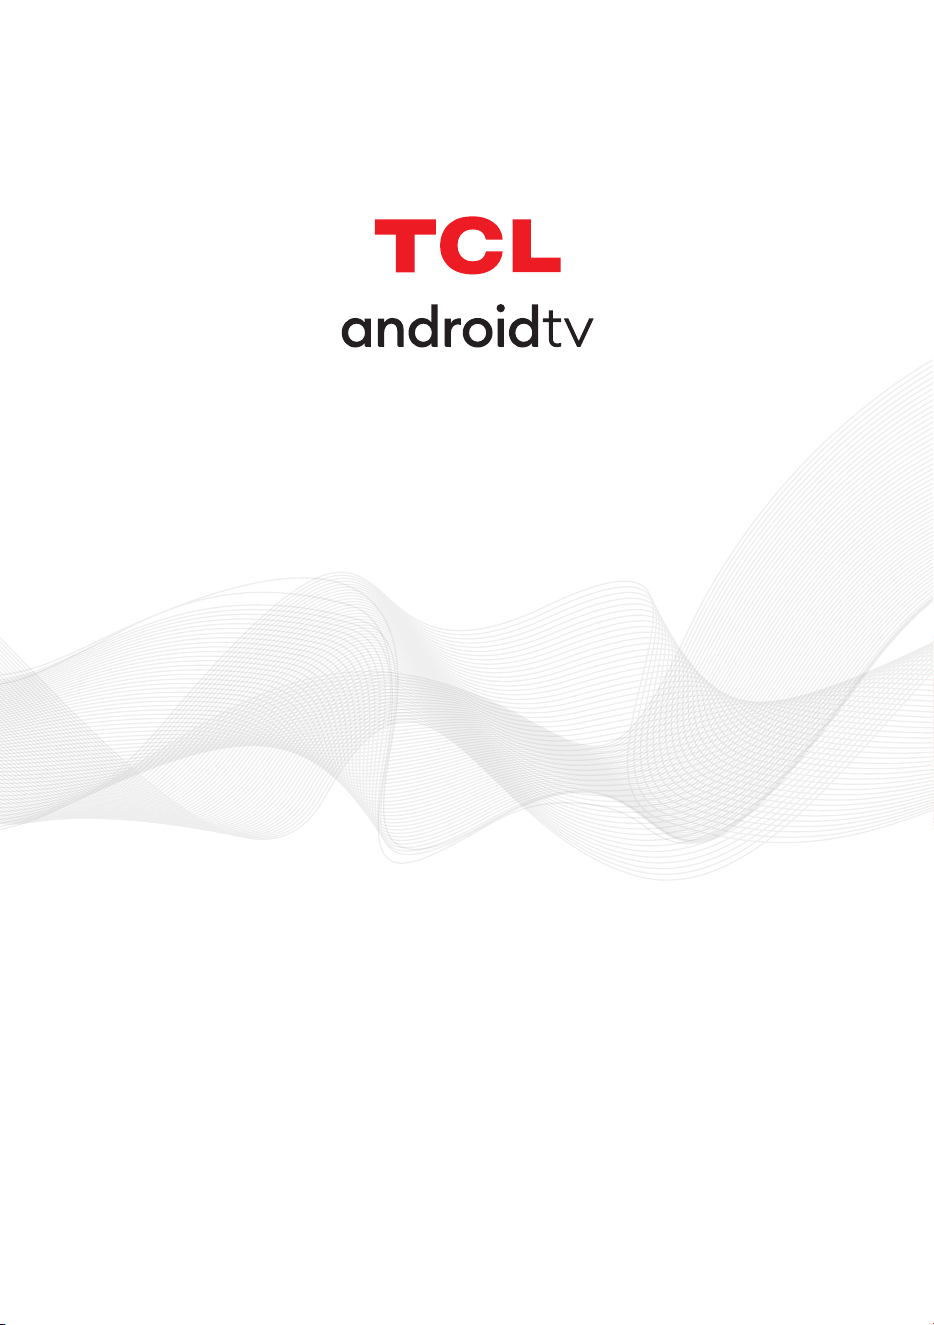 TCL 32 Class HD LED Android Smart TV 3-Series - 32S21 